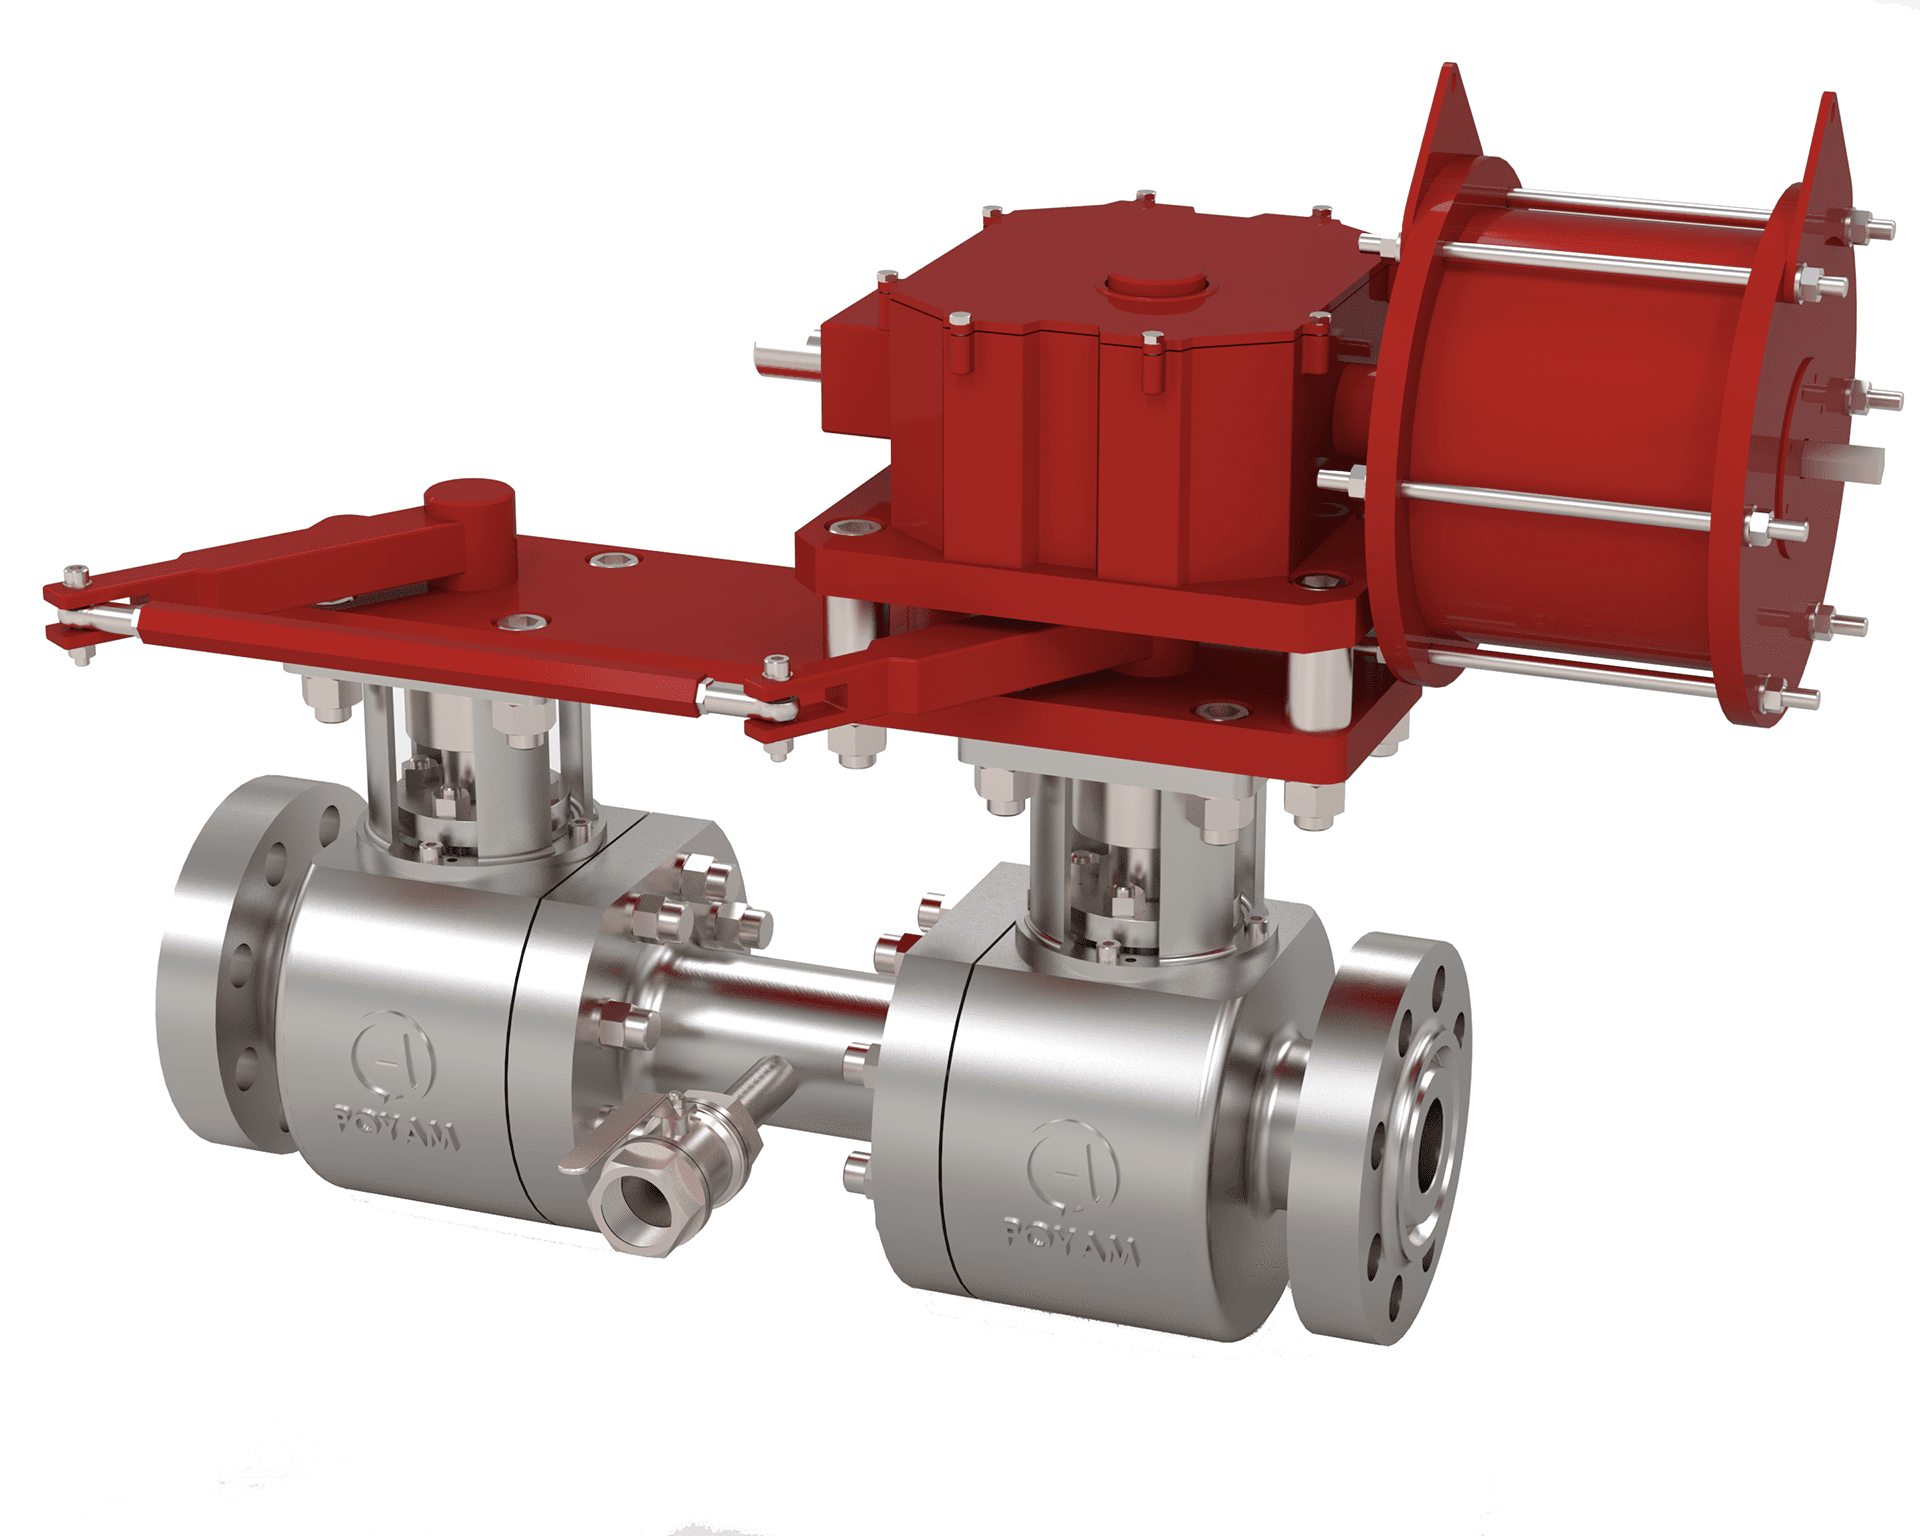 Product Severe service twin ball valves for catalyst handling - Ampo image